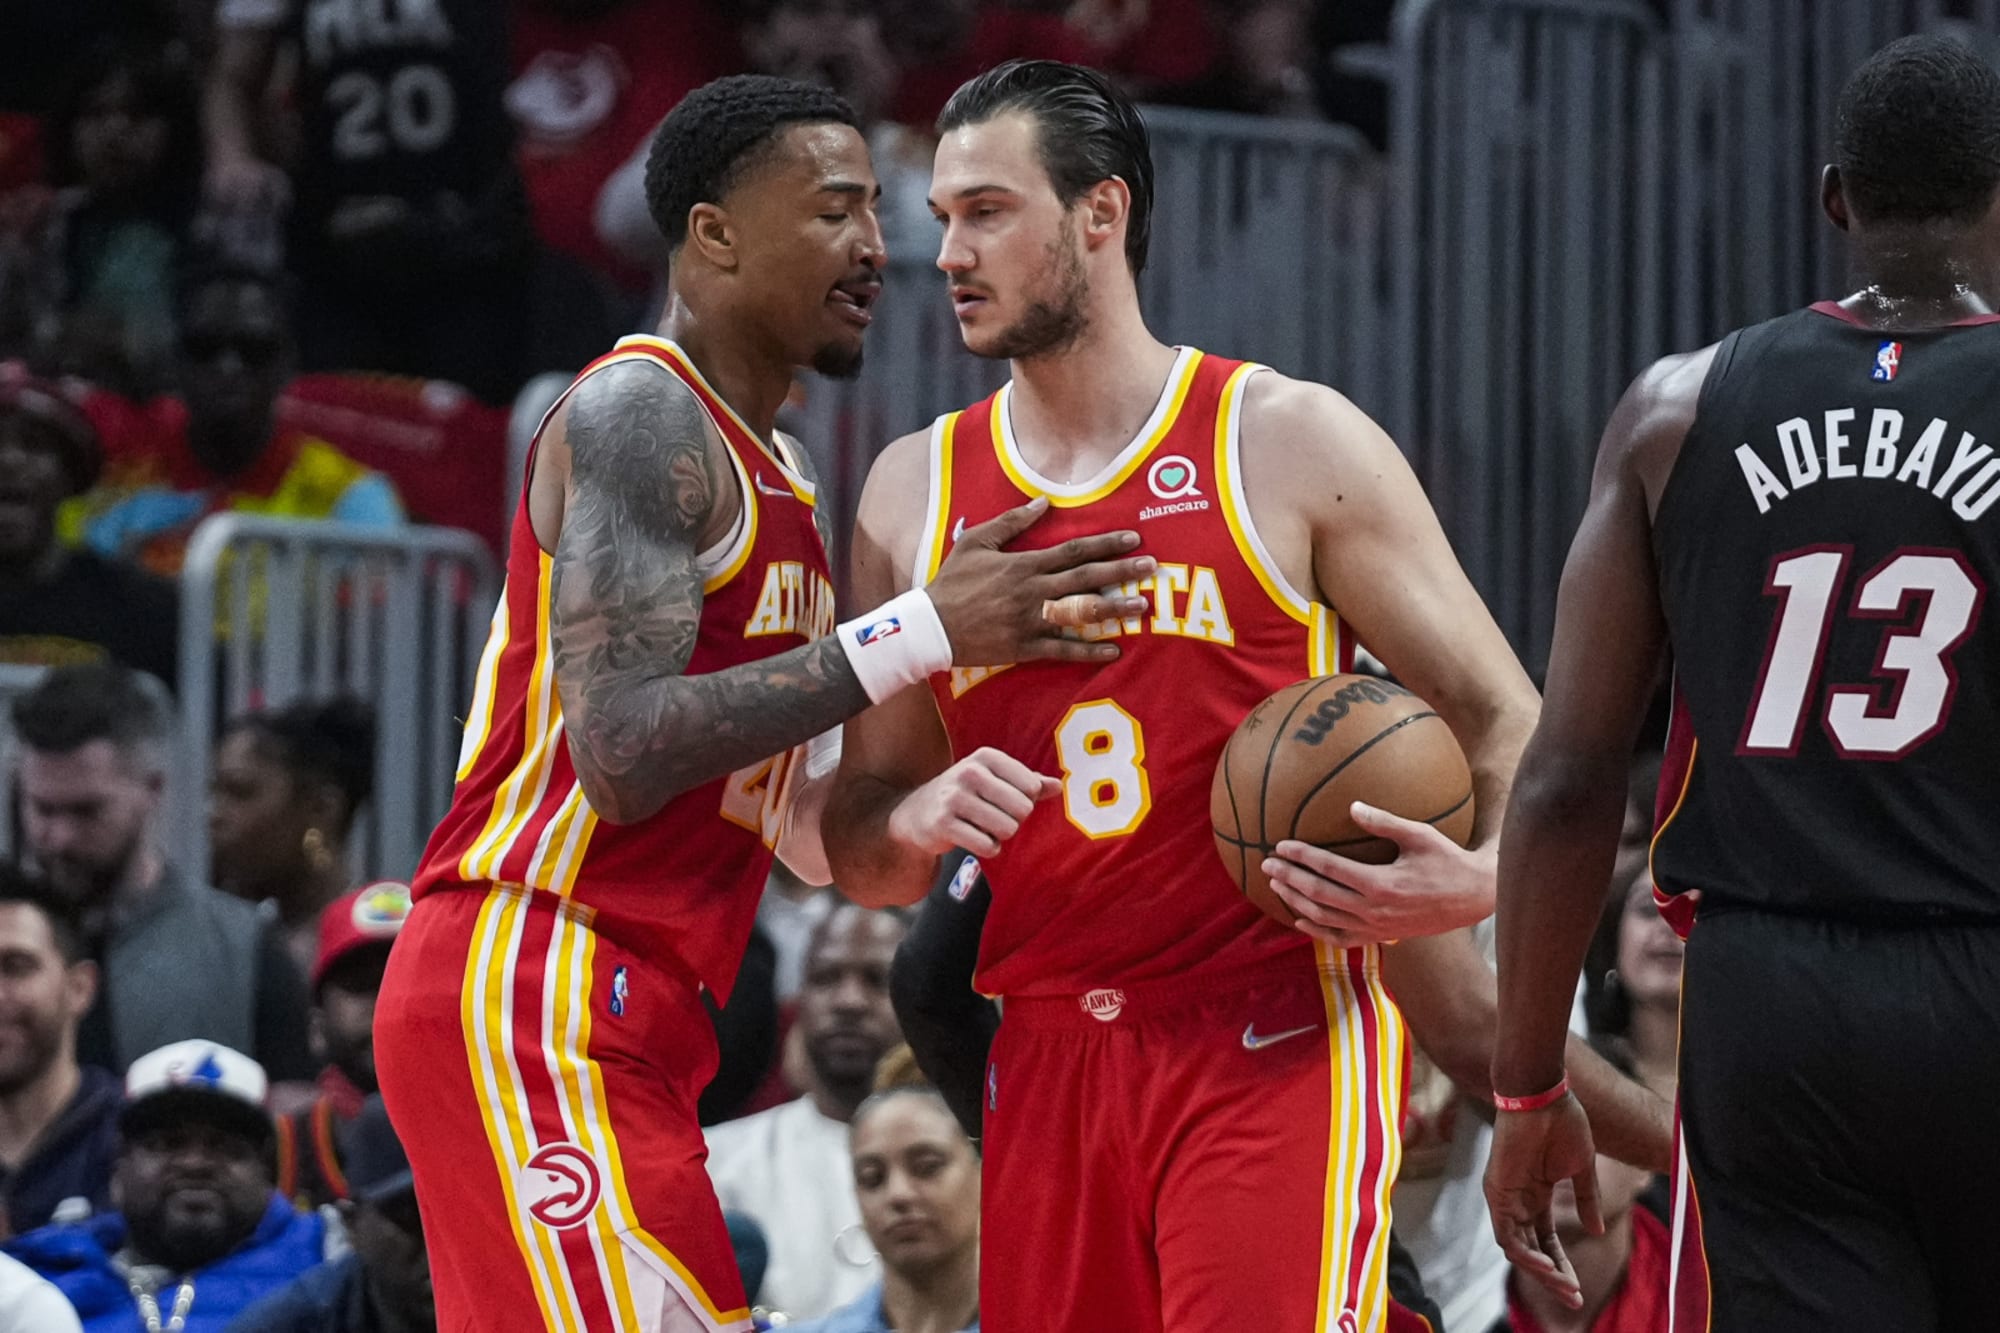 The Atlanta Hawks need to spread the load through role players